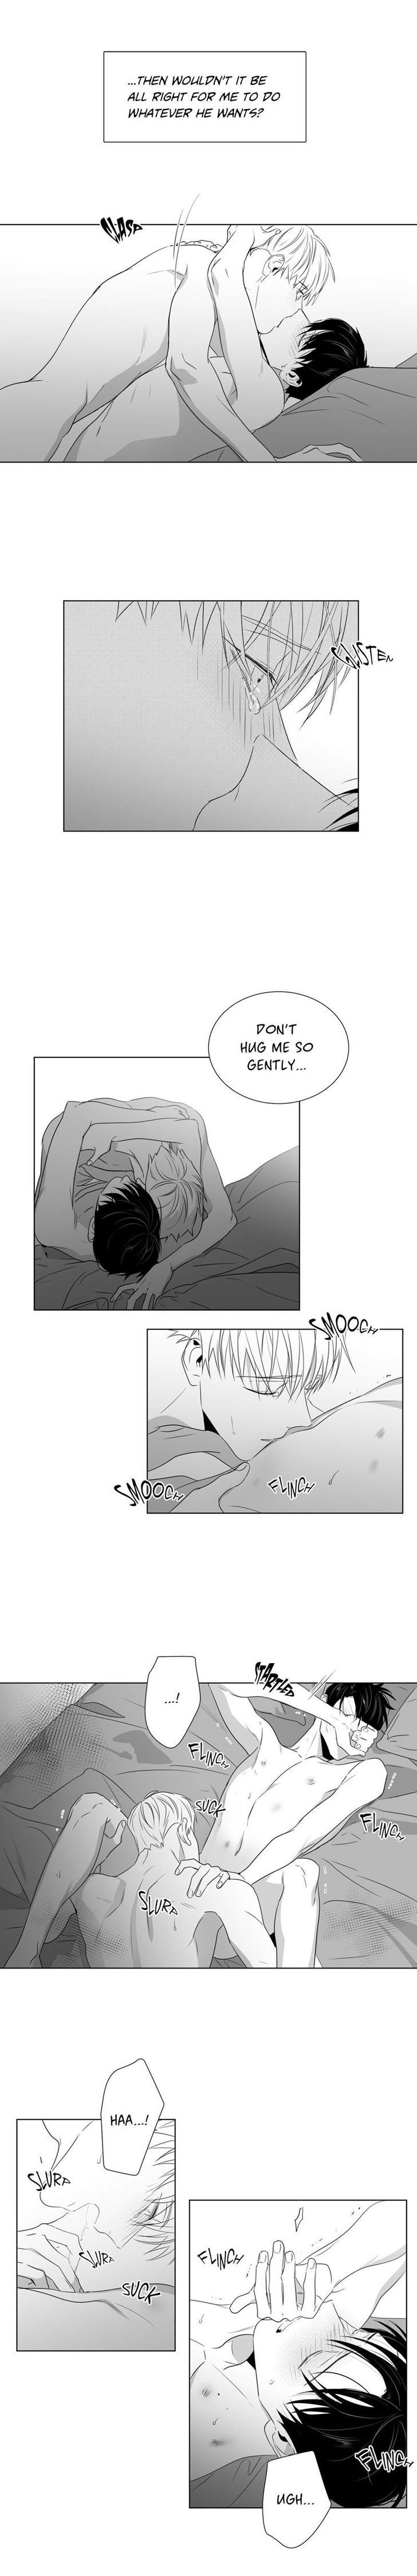 Lover Boy (Lezhin) Chapter 047 page 4